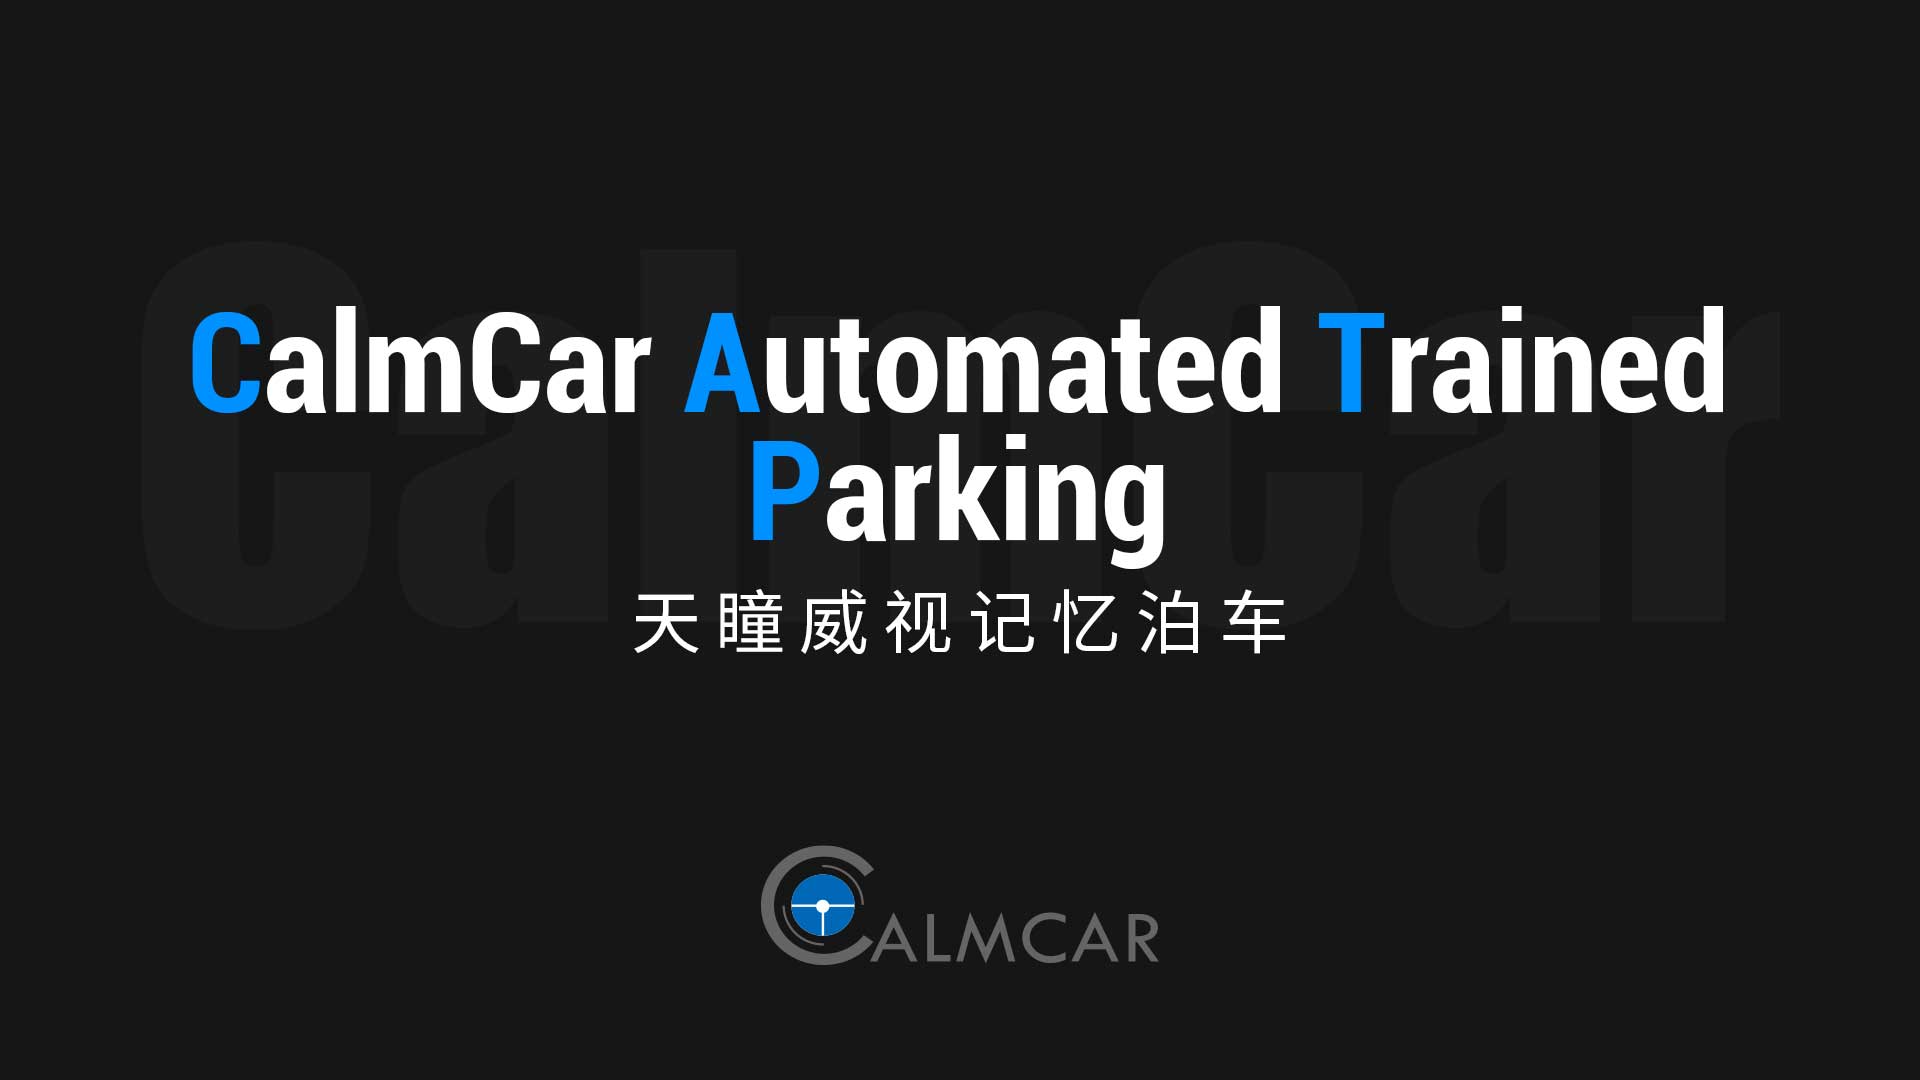 CalmCar Automated Trained Parking